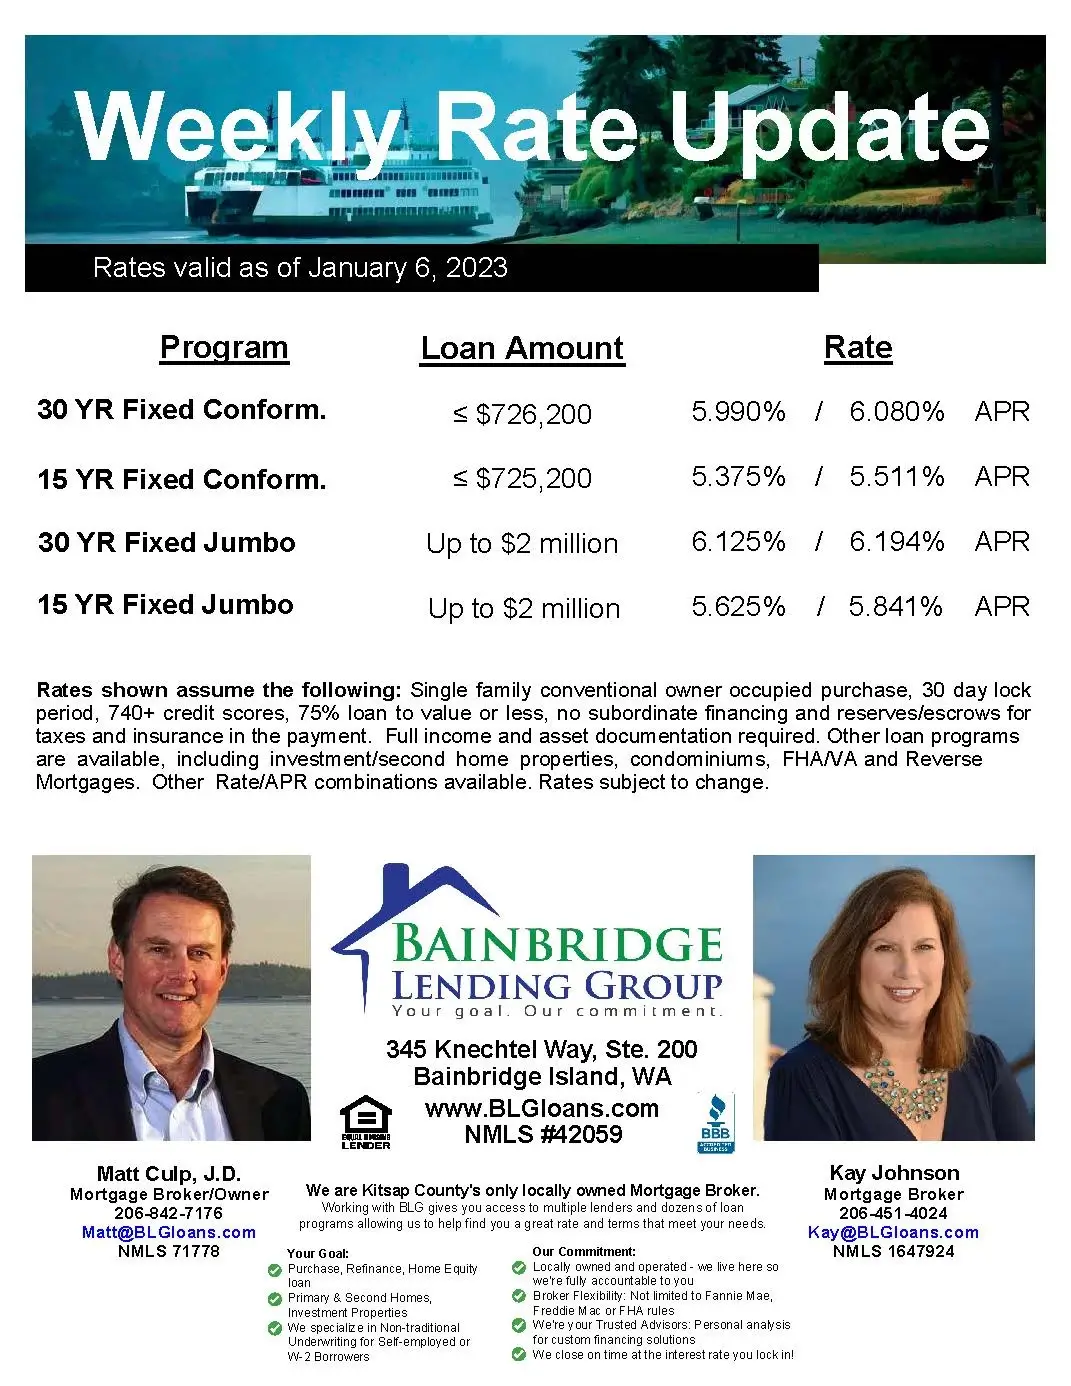 Weekly Rate Update for January 6, 2023